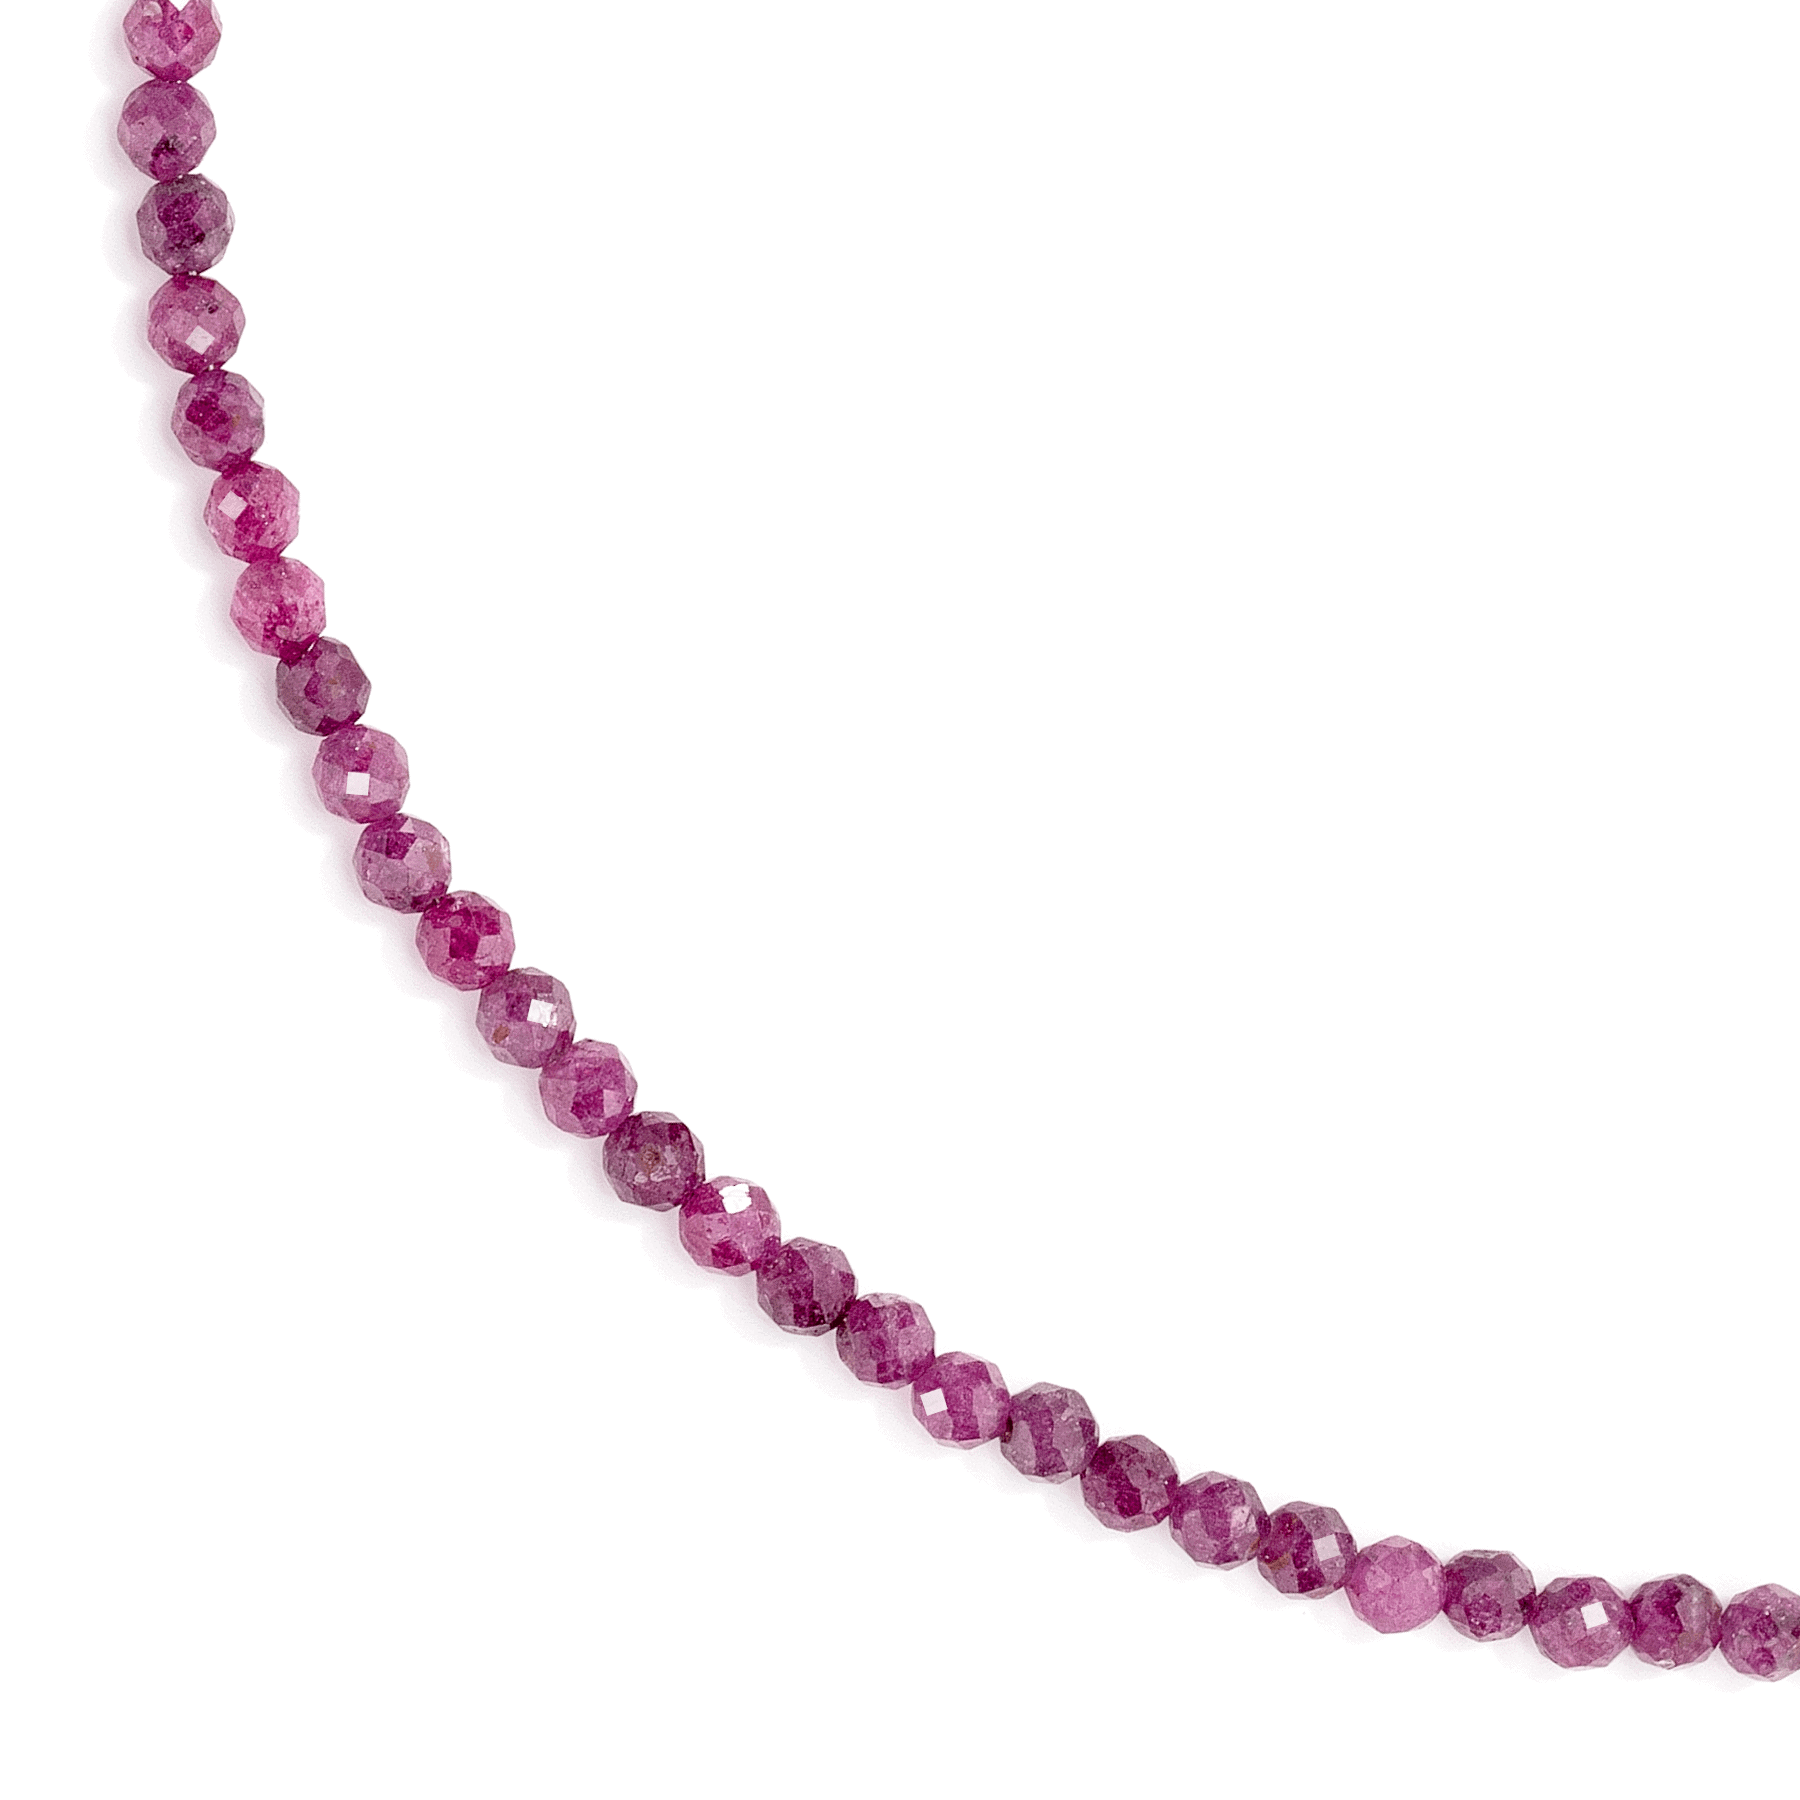 Jewelry from natural rubies